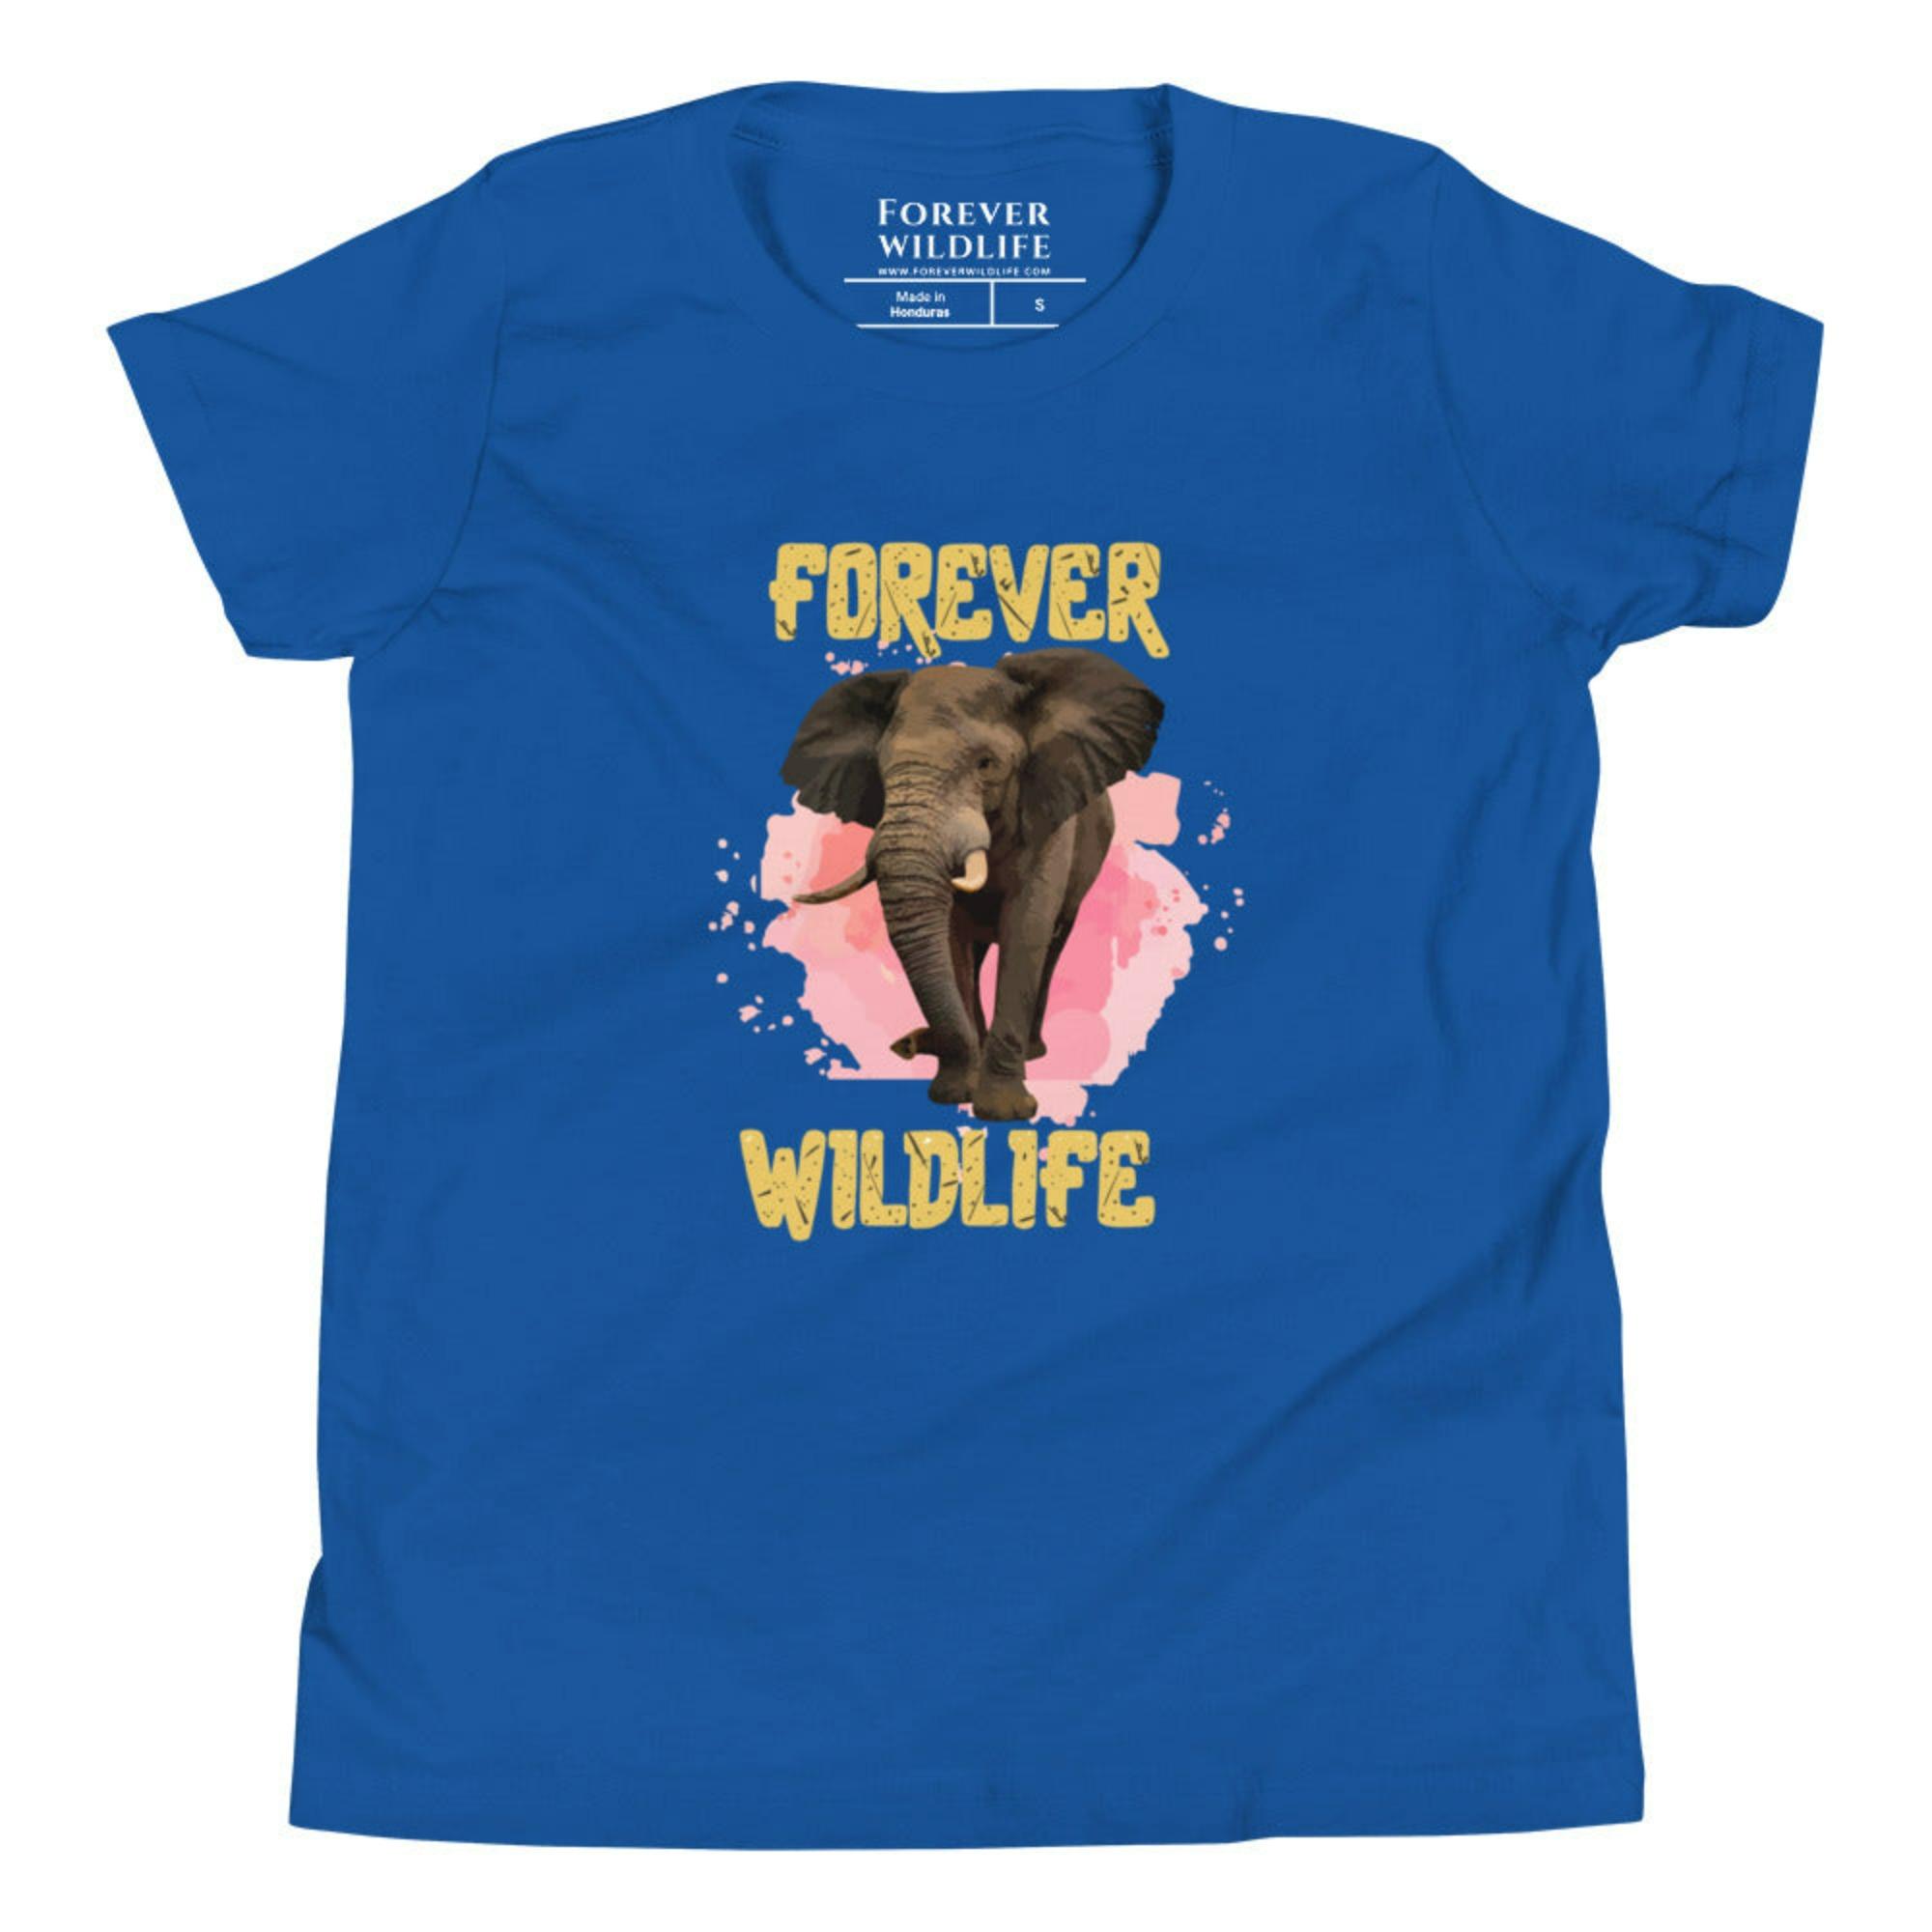 True Royal Youth T-Shirt with Elephant graphic as part of Wildlife T Shirts, Wildlife Clothing & Apparel by Forever Wildlife